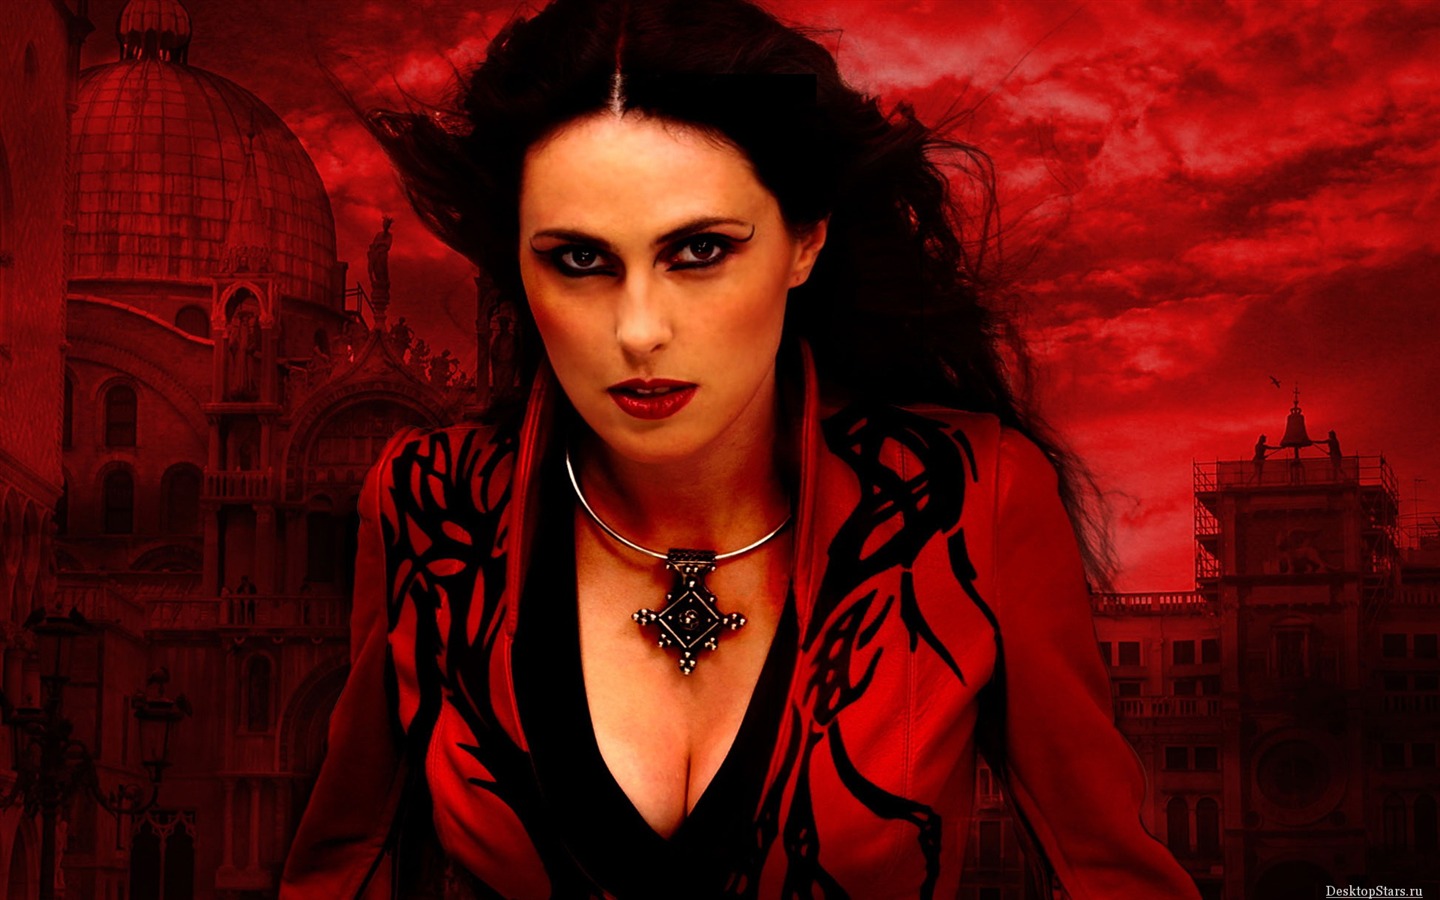 Sharon den Adel #009 - 1440x900 Wallpapers Pictures Photos Images